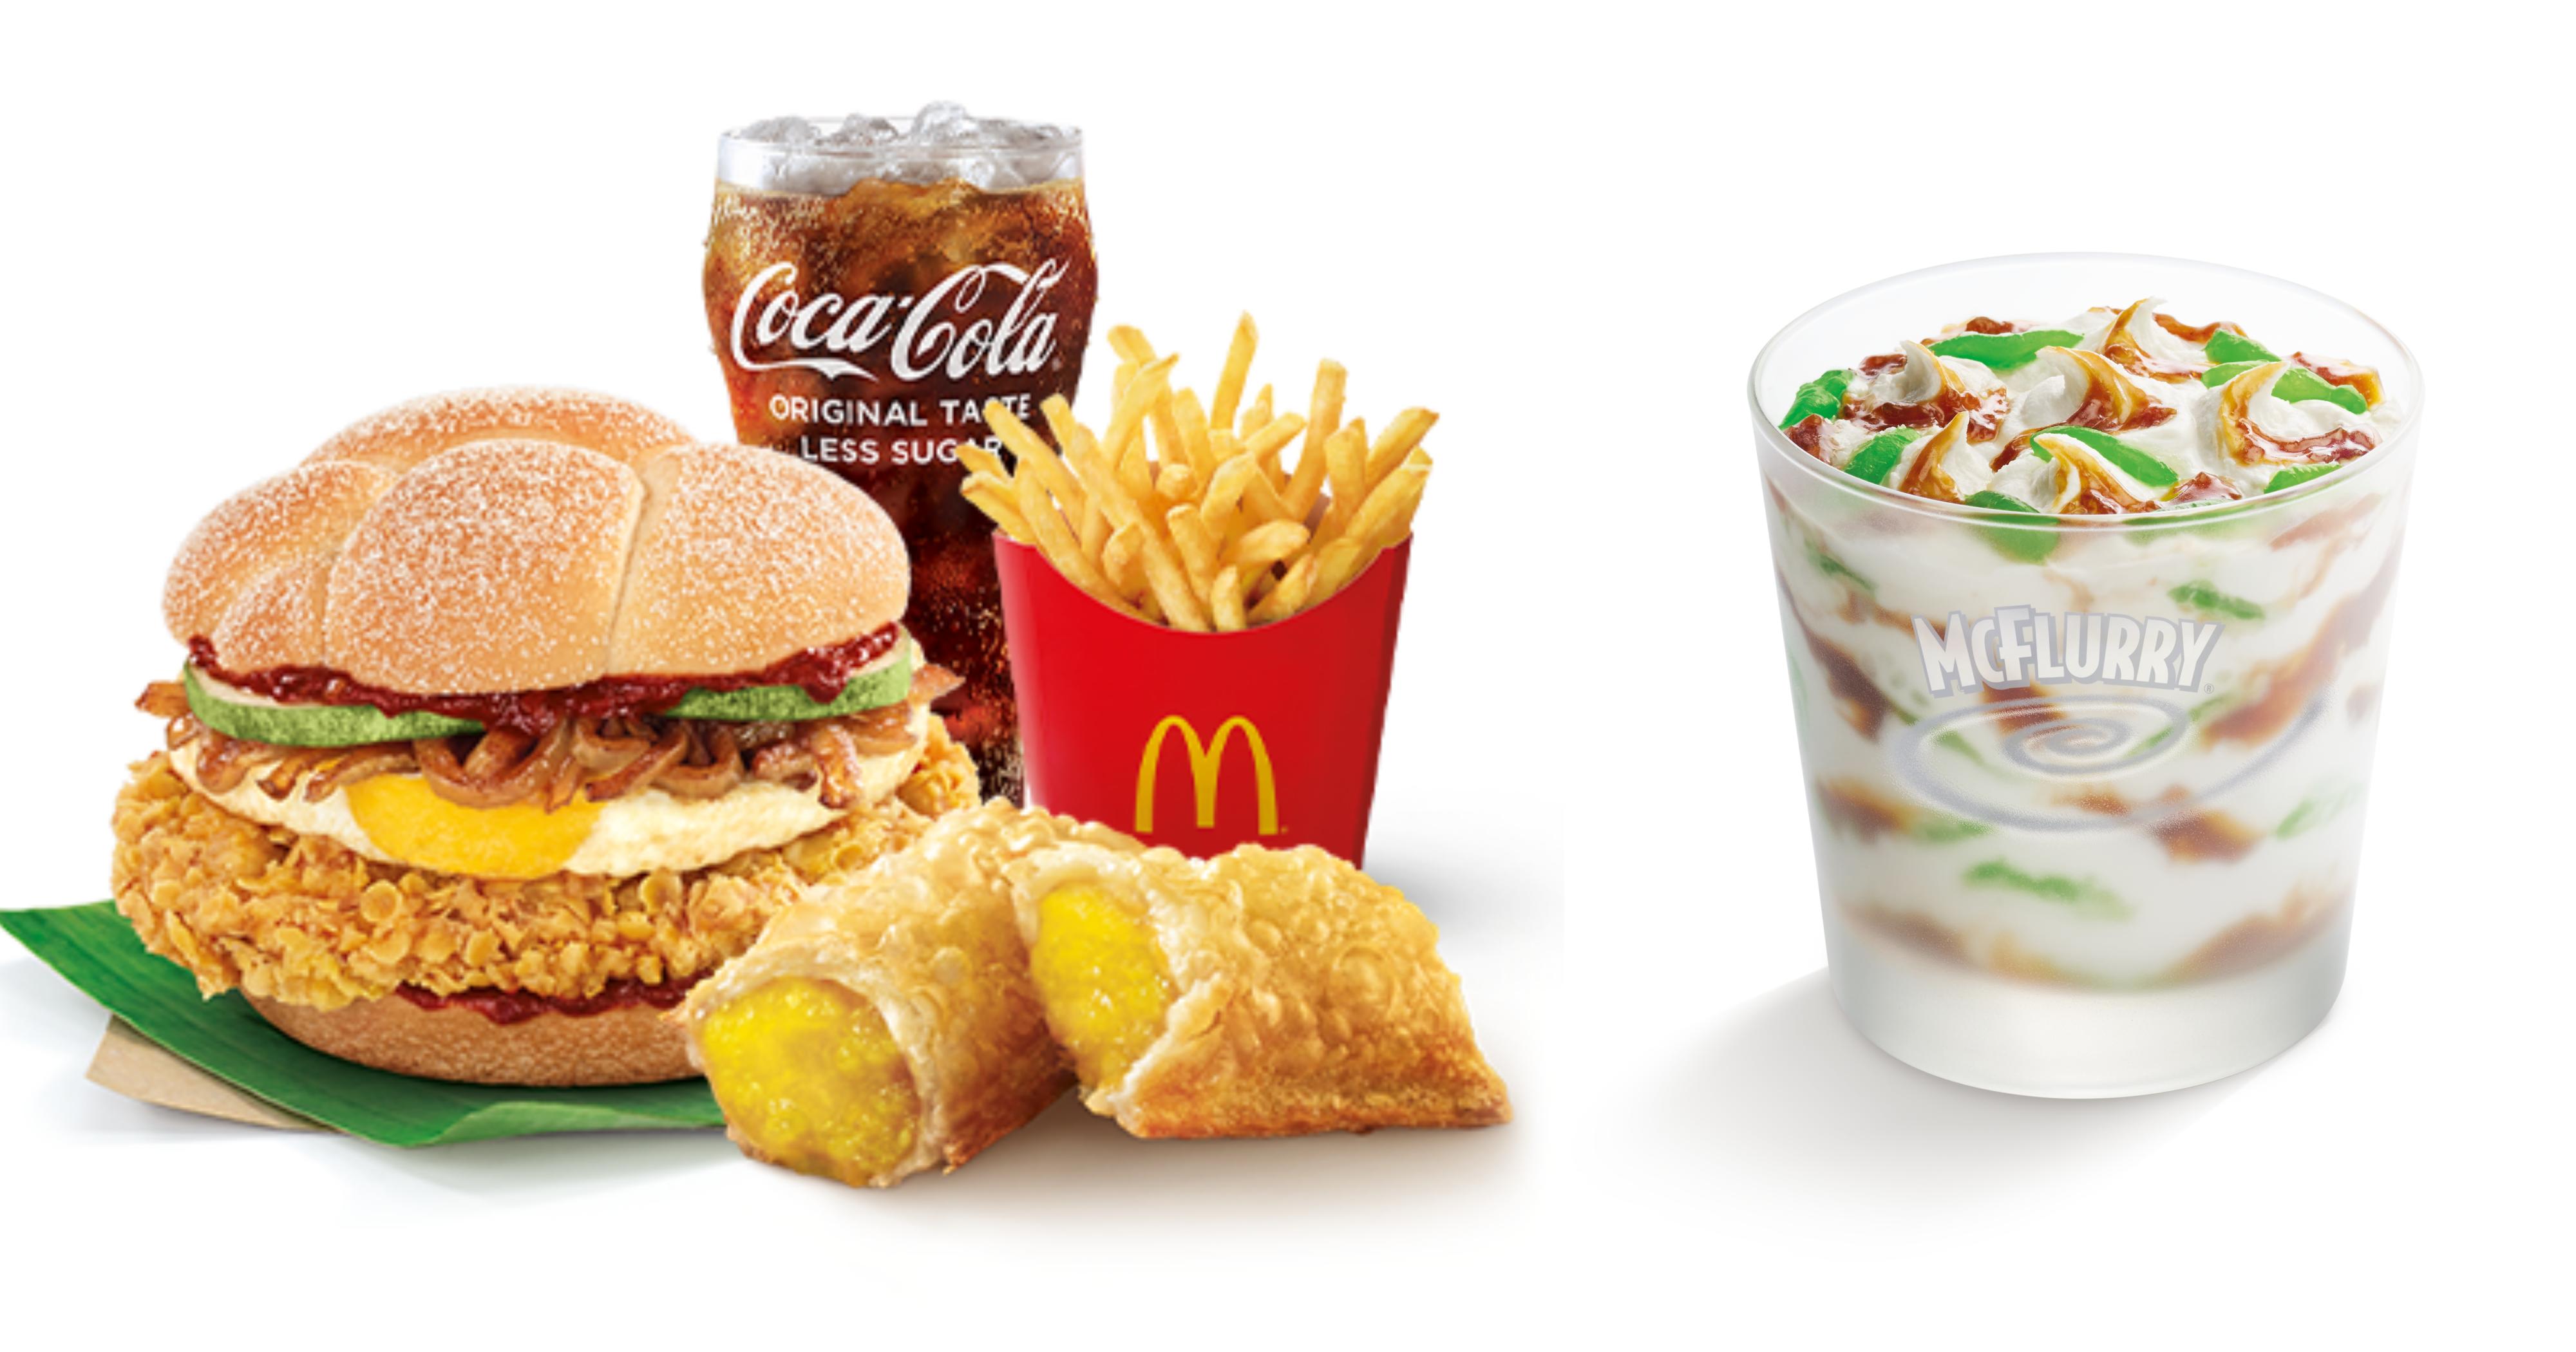 Mcdonald S S Pore Bringing Back Nasi Lemak Burger Banana Pie Chendol Soft Serve From April 25 2019 Mothership Sg News From Singapore Asia And Around The World